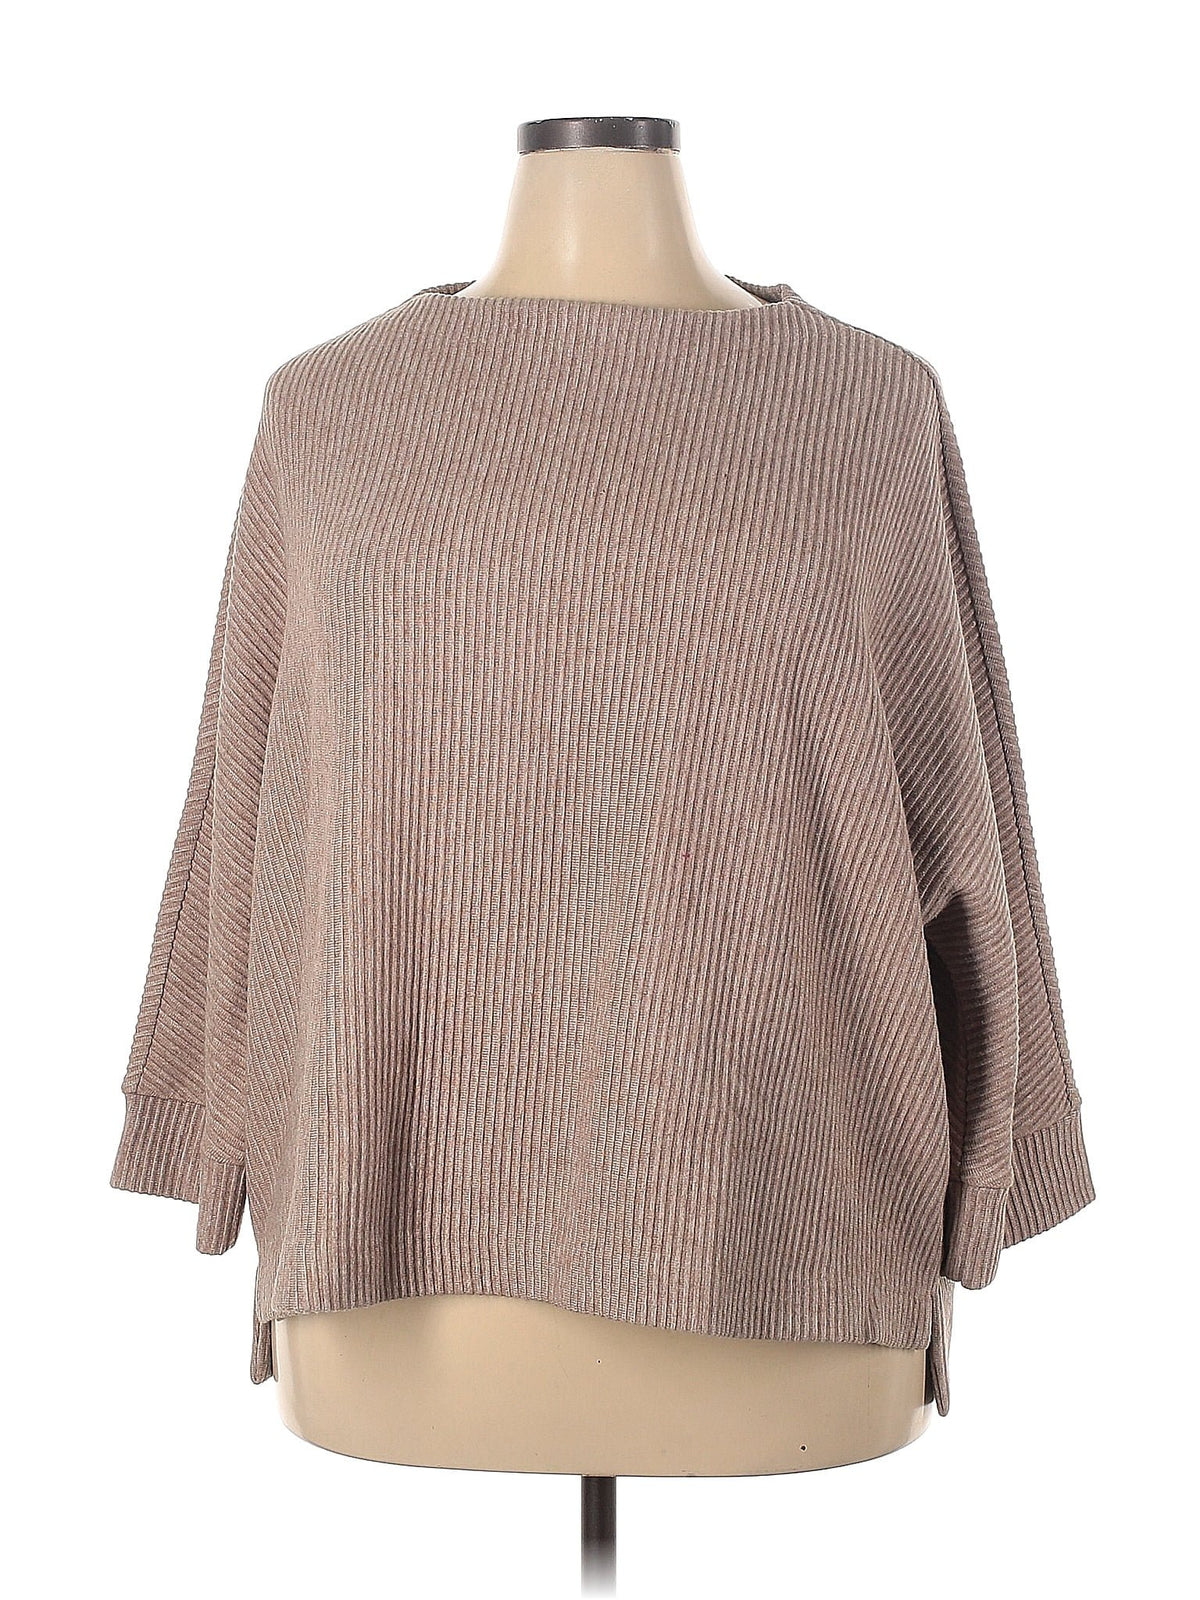 Pullover Sweater size - 2X W